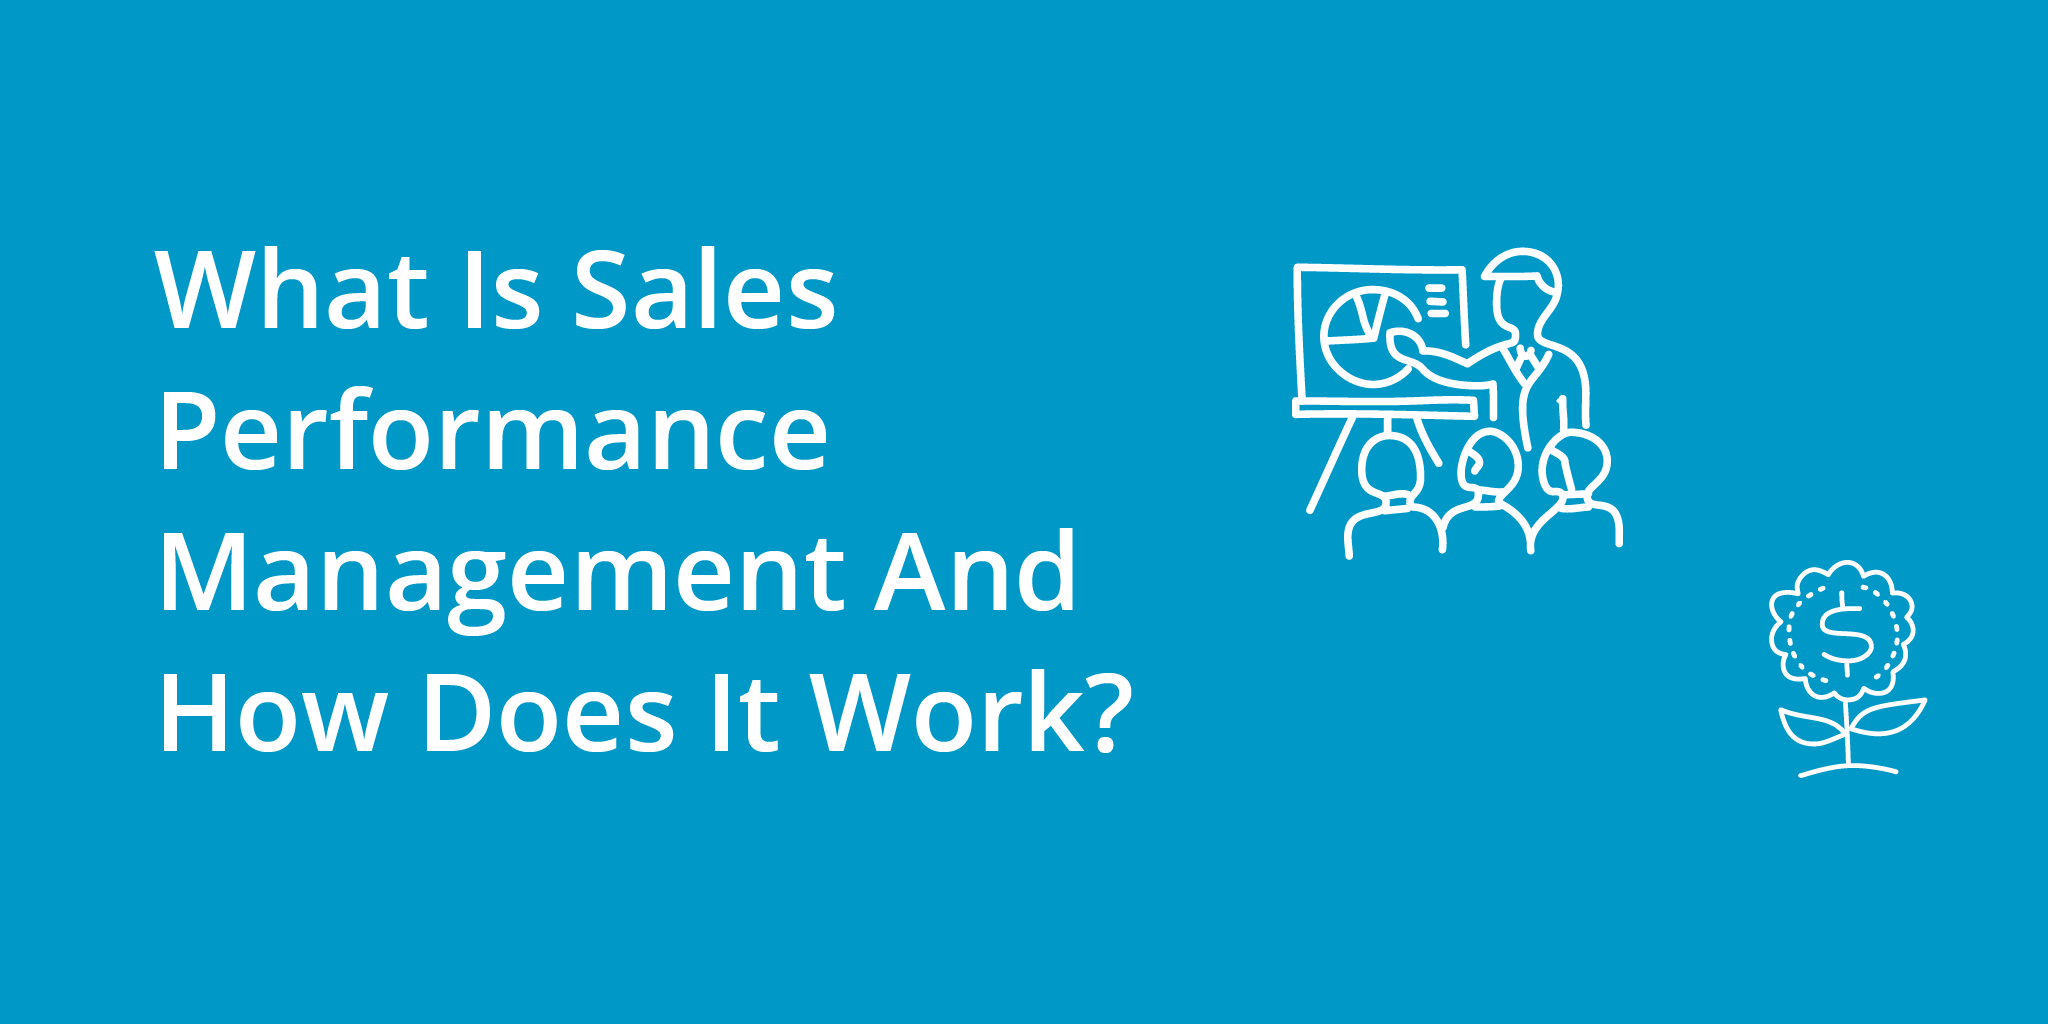 What Is Sales Performance Management And How Does It Work? | Telephones for business